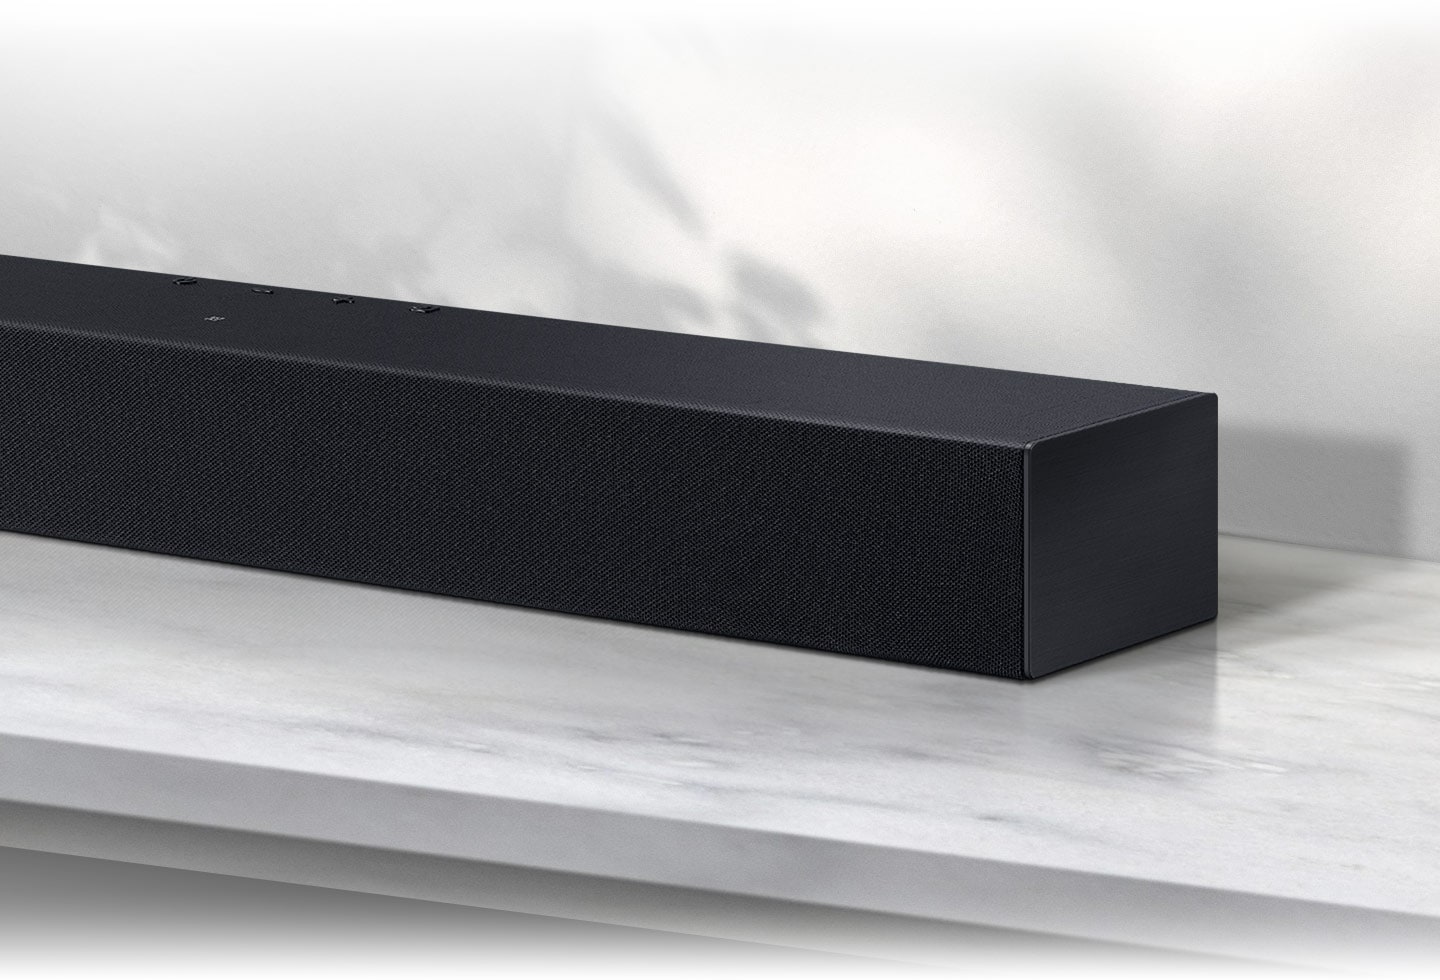 Samsung Soundbar C400 with two woofers and two tweeters all in one soundbar.